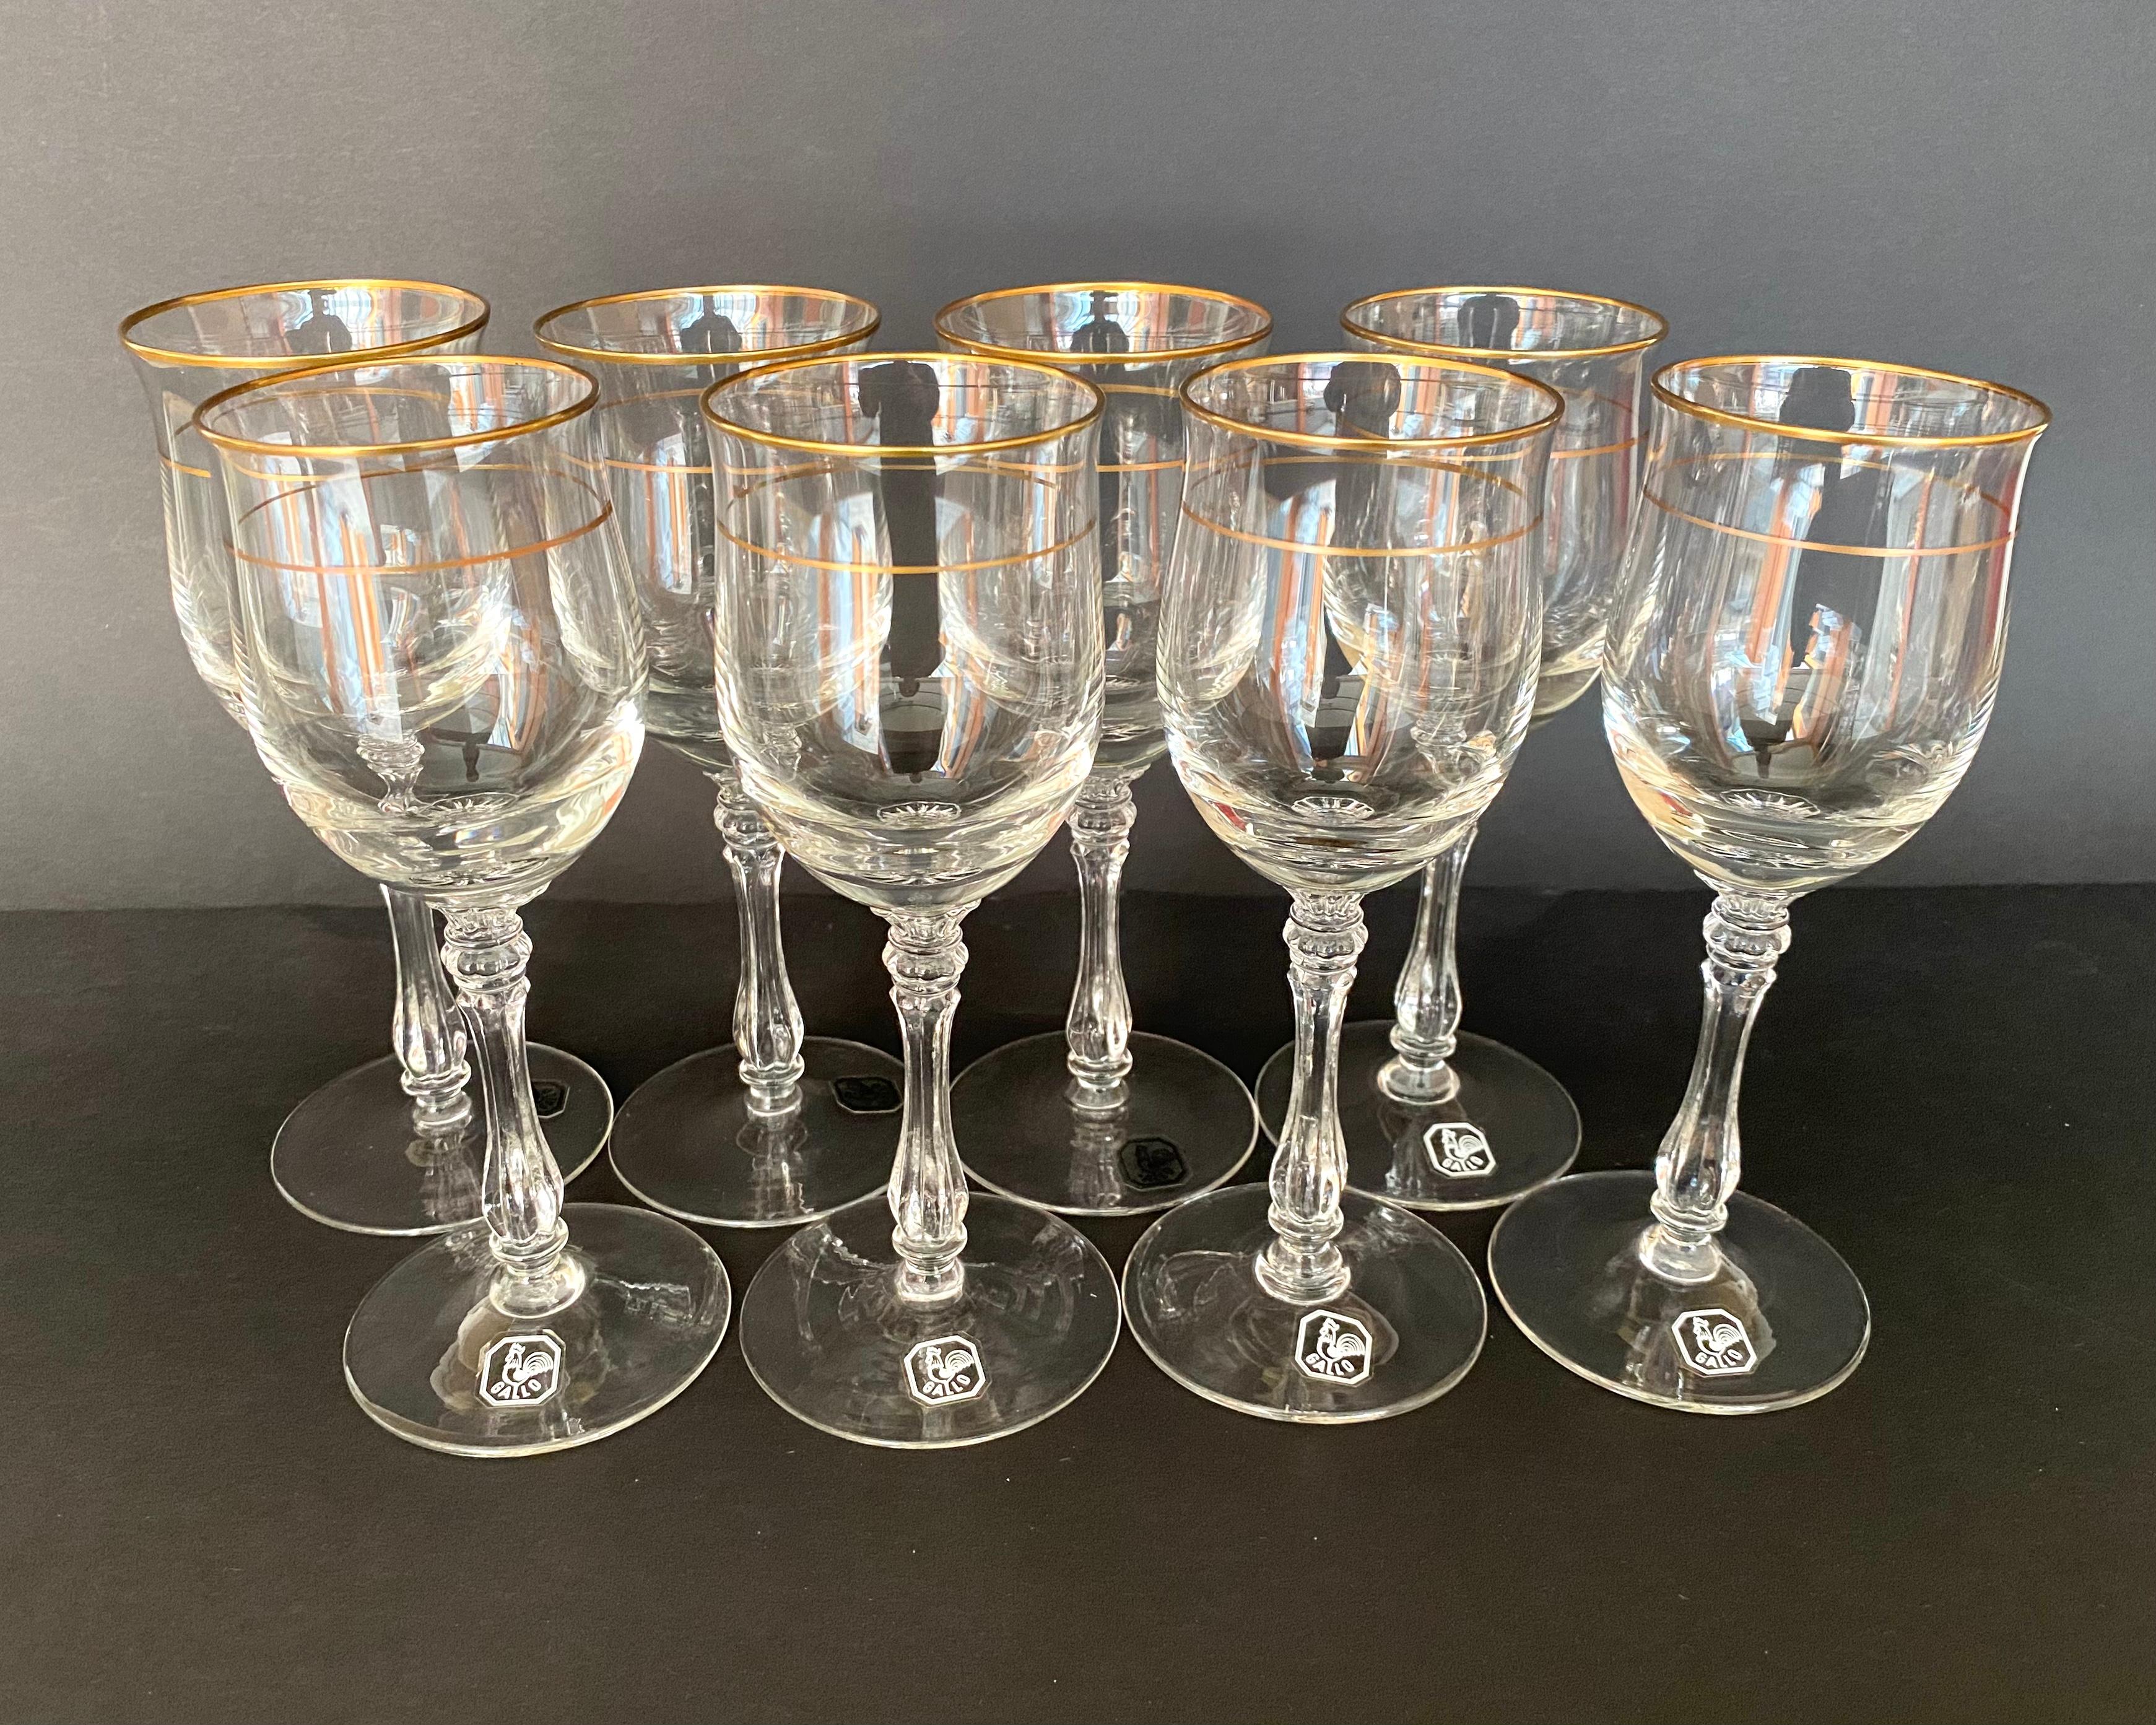 Vintage crystal wine glasses with gilt rim, set 8, produced in Germany by GALLO manufacturer, circa 1980s. 

Gallo wine glasses are famous for their unsurpassed beauty and royal splendor. 

The wine glasses are hand-cut and munge blown. Elegant